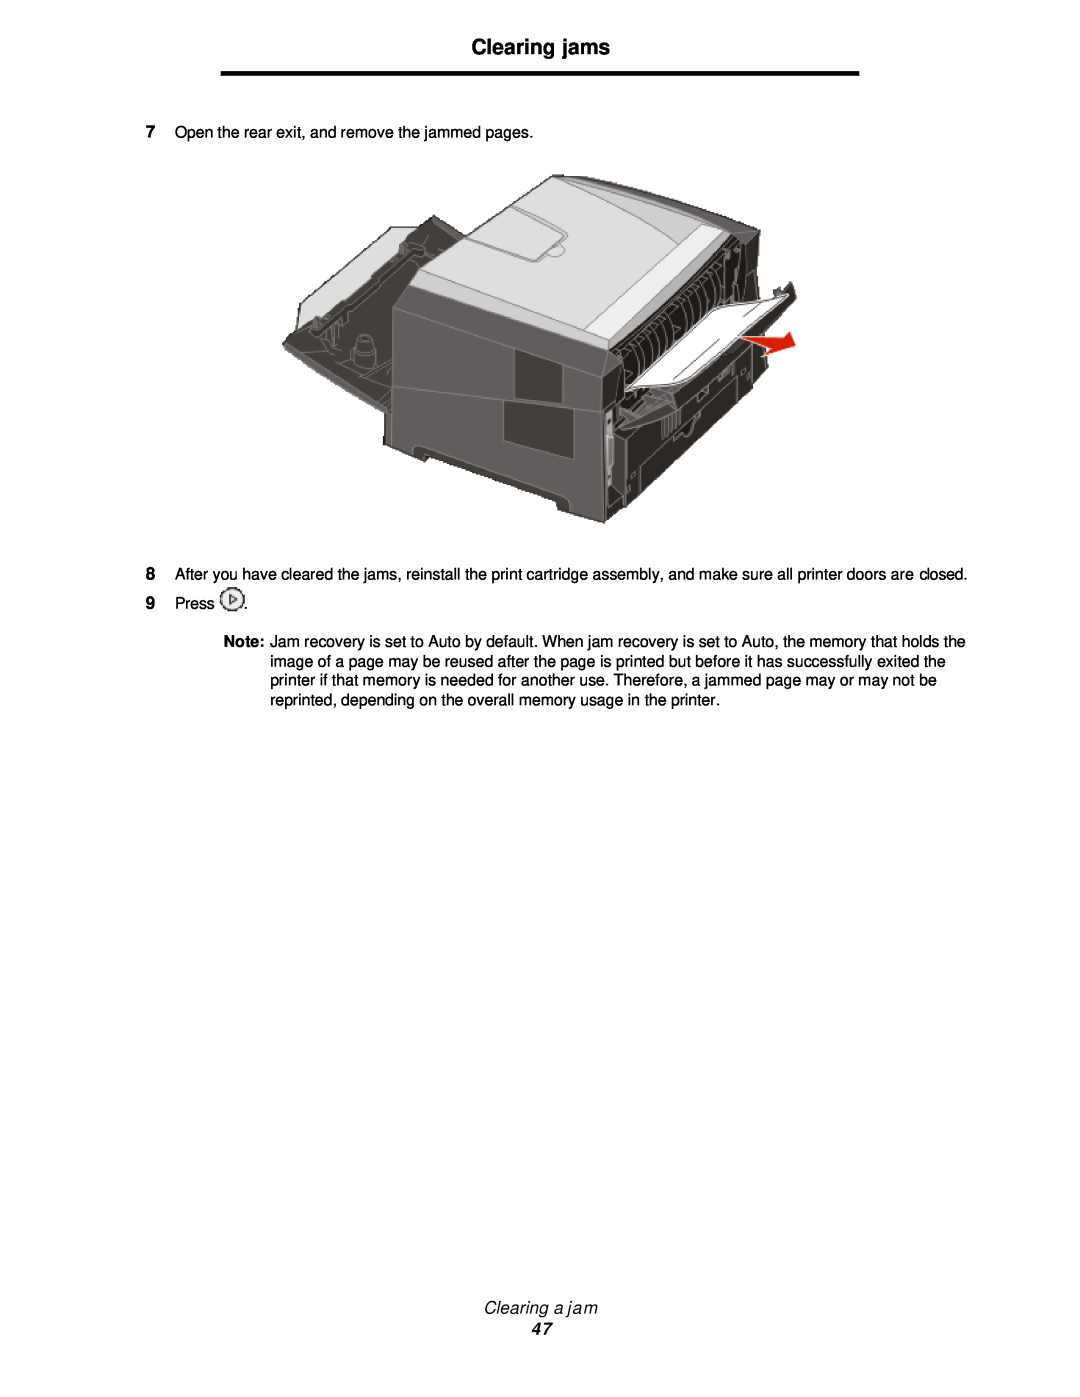 Lexmark 350d manual Clearing jams, Clearing a jam, Open the rear exit, and remove the jammed pages 